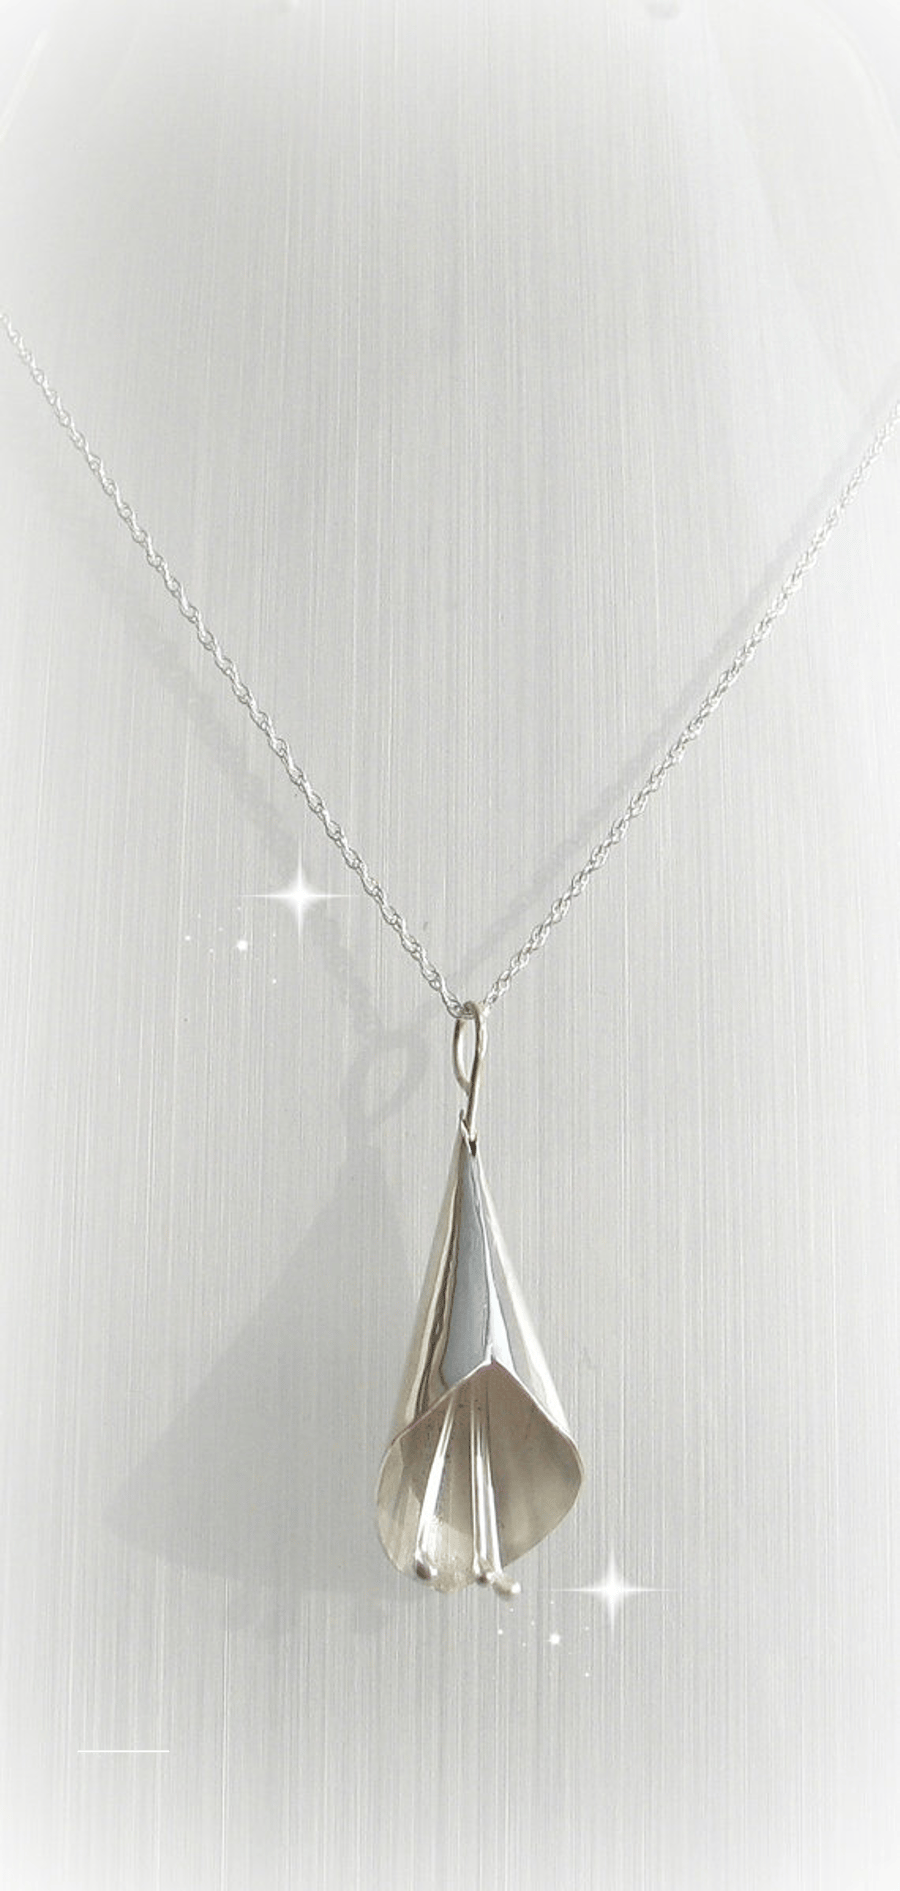 Calla Lily Necklace, Sterling Silver Jewellery, Flower Jewellery